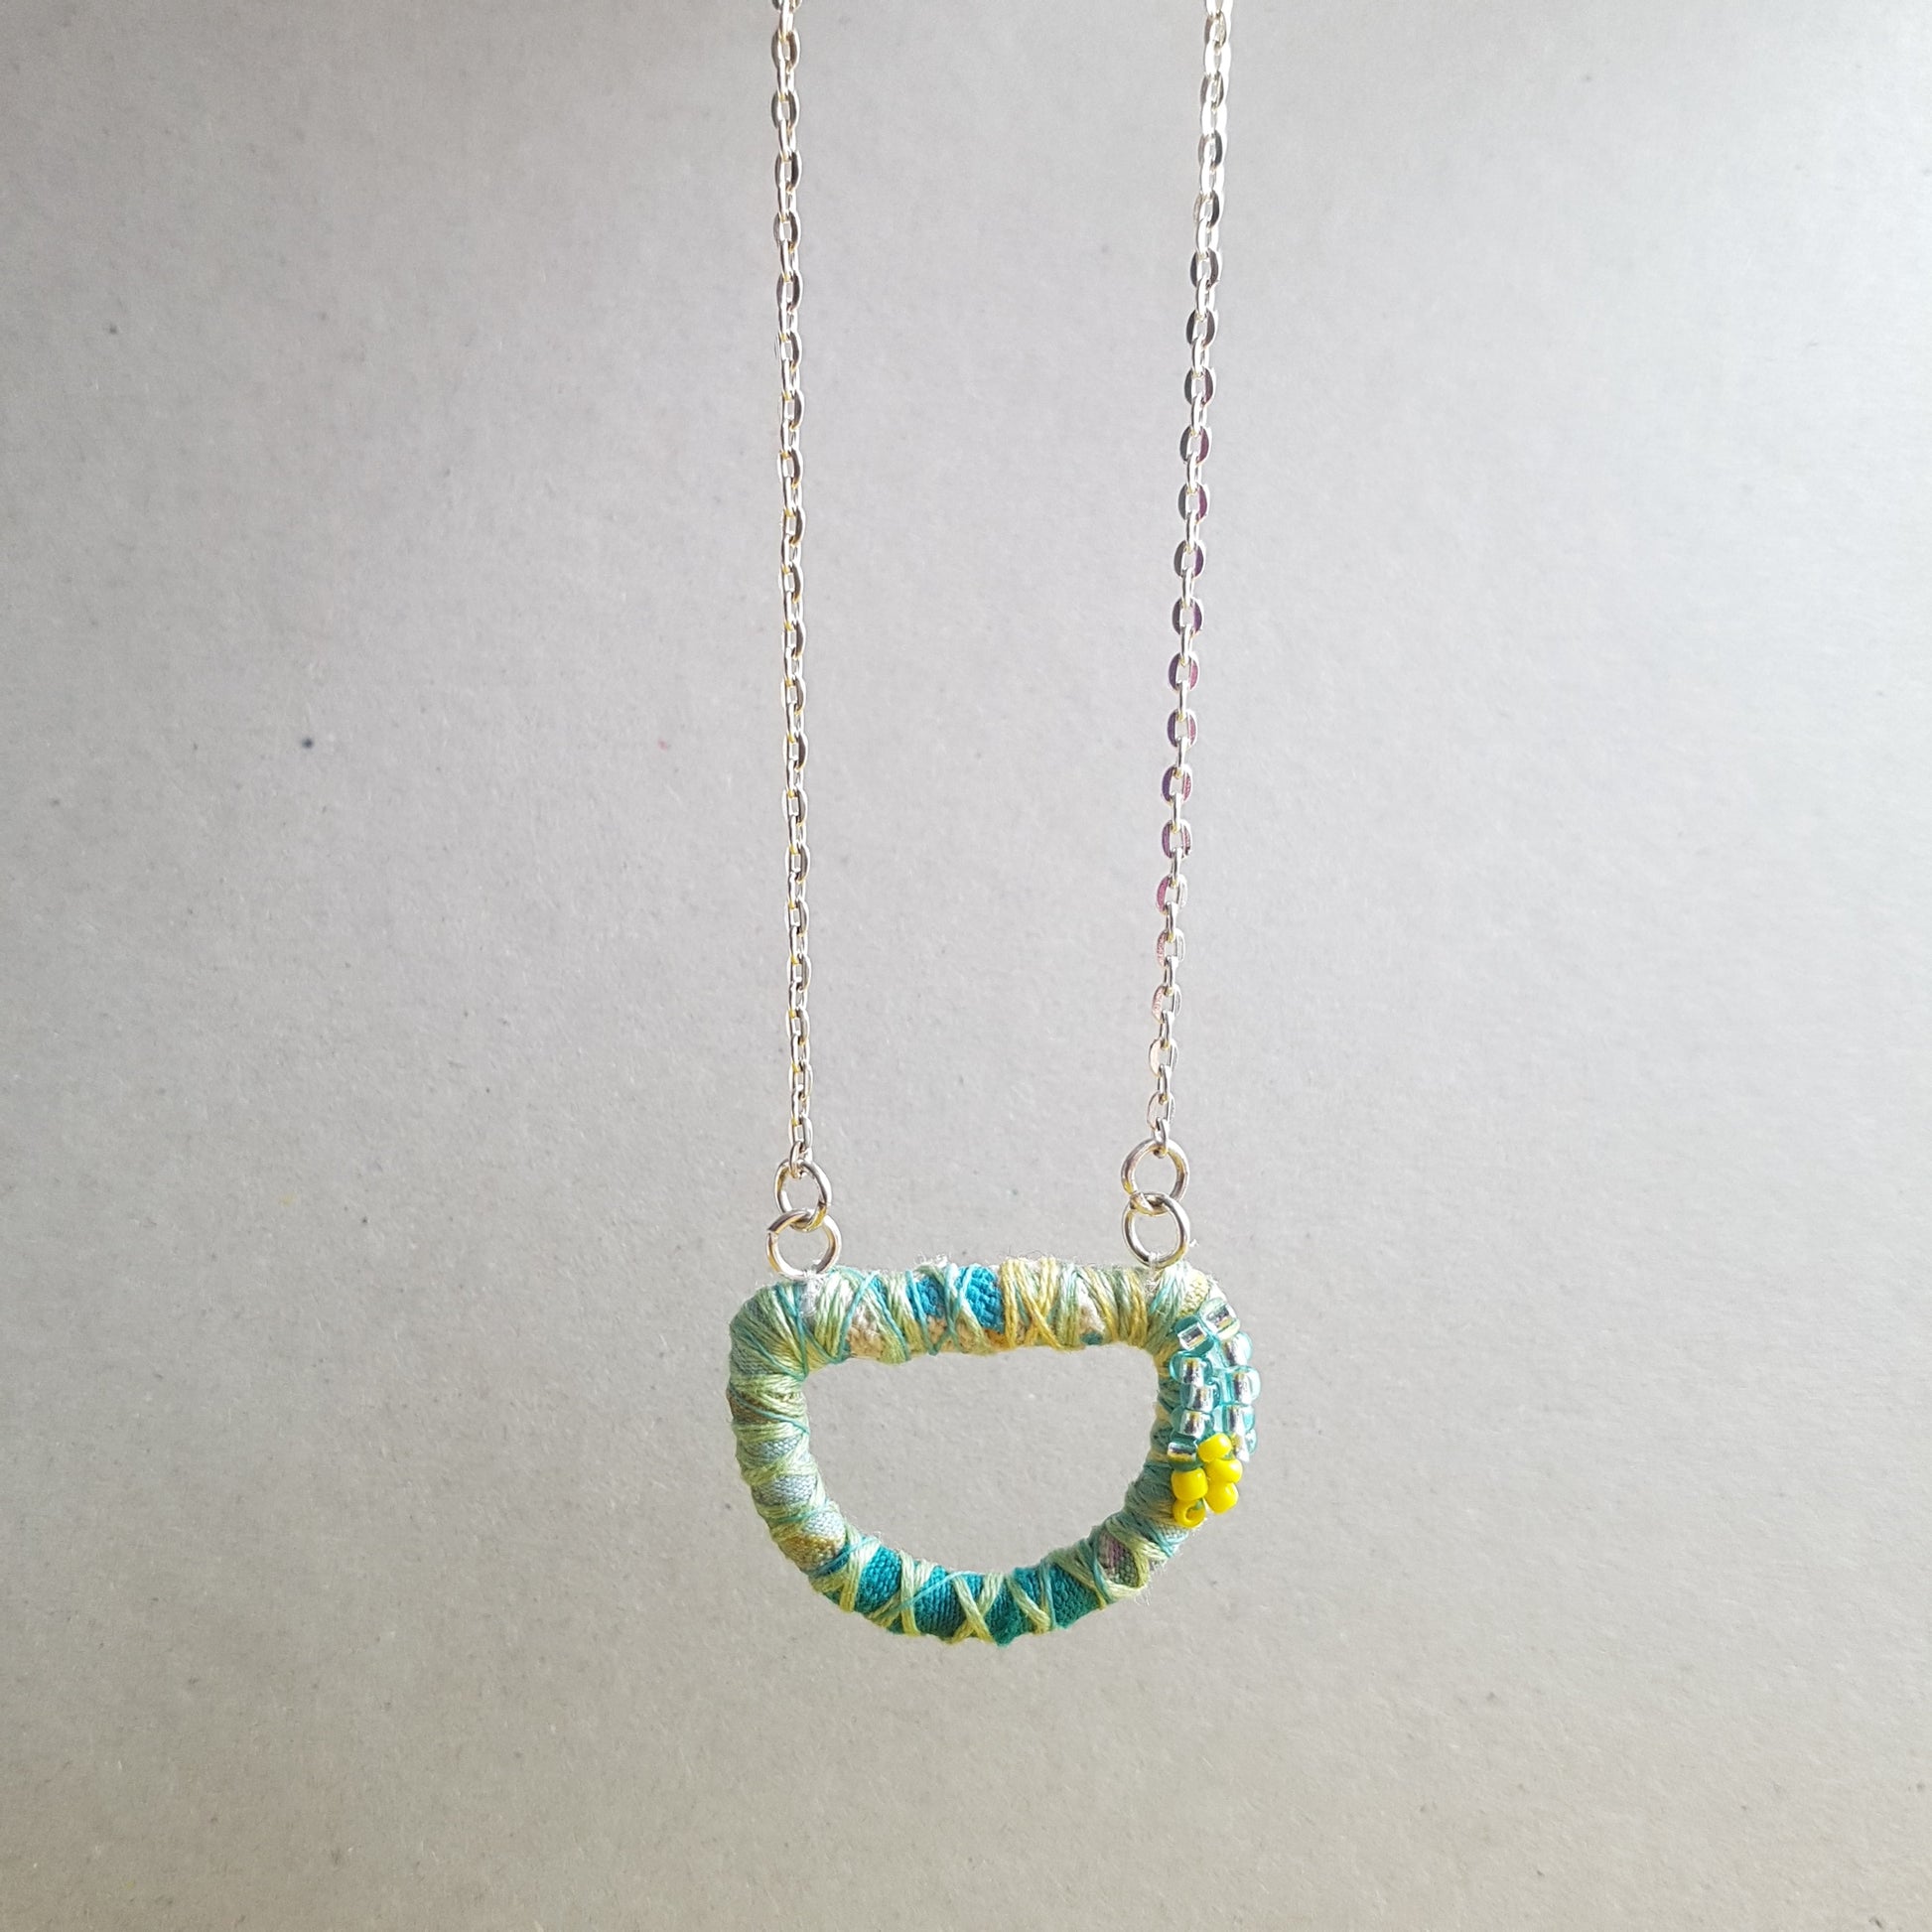 Textile art necklace with 18" silver plated chain hanging against a grey background.